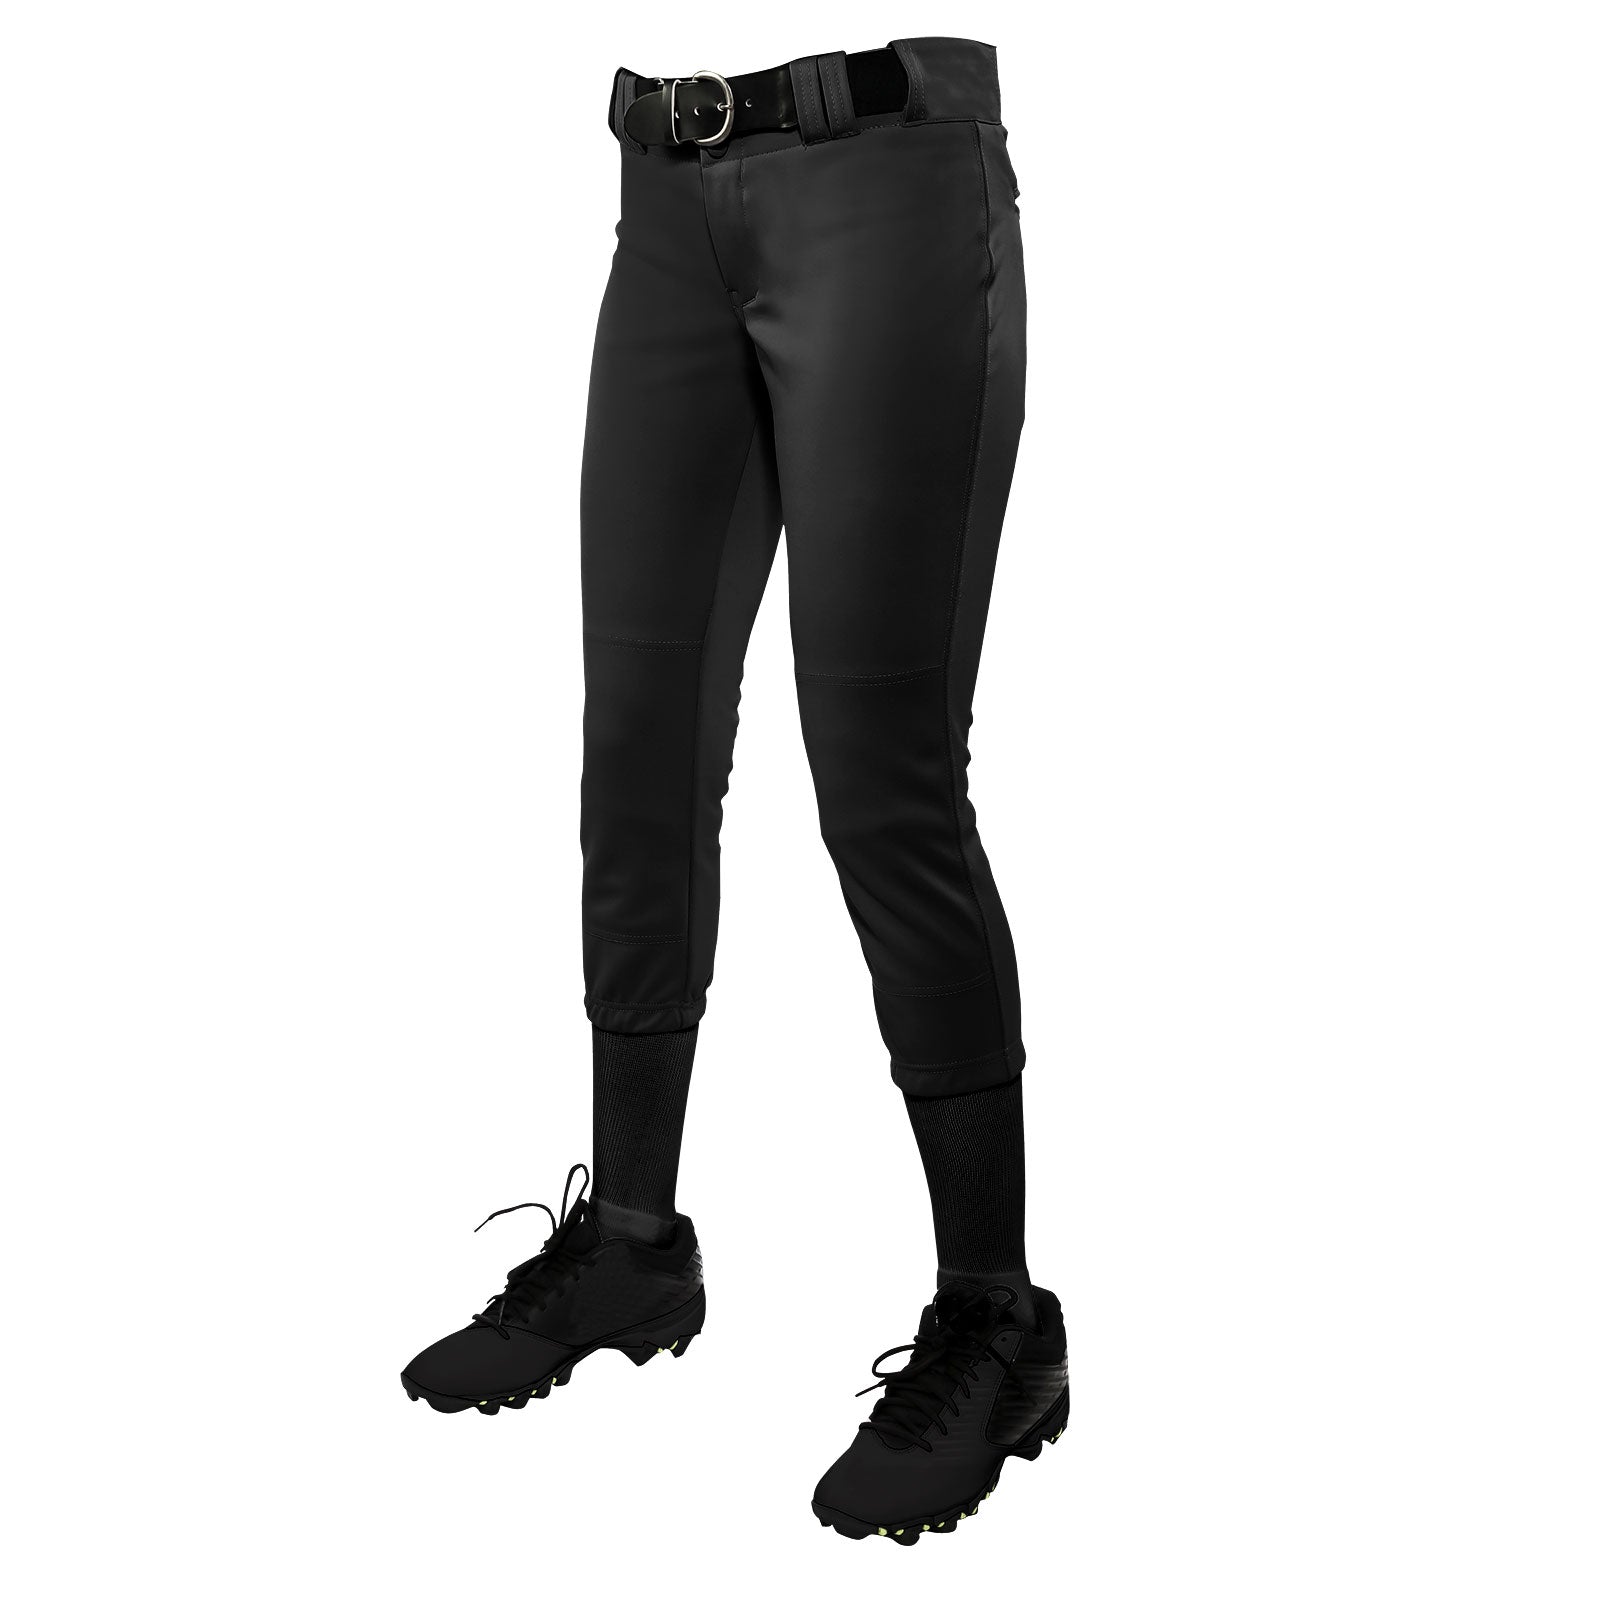 Tournament Women's/Girls Traditional Low-Rise Pants 6-Colors Available - AtlanticCoastSports